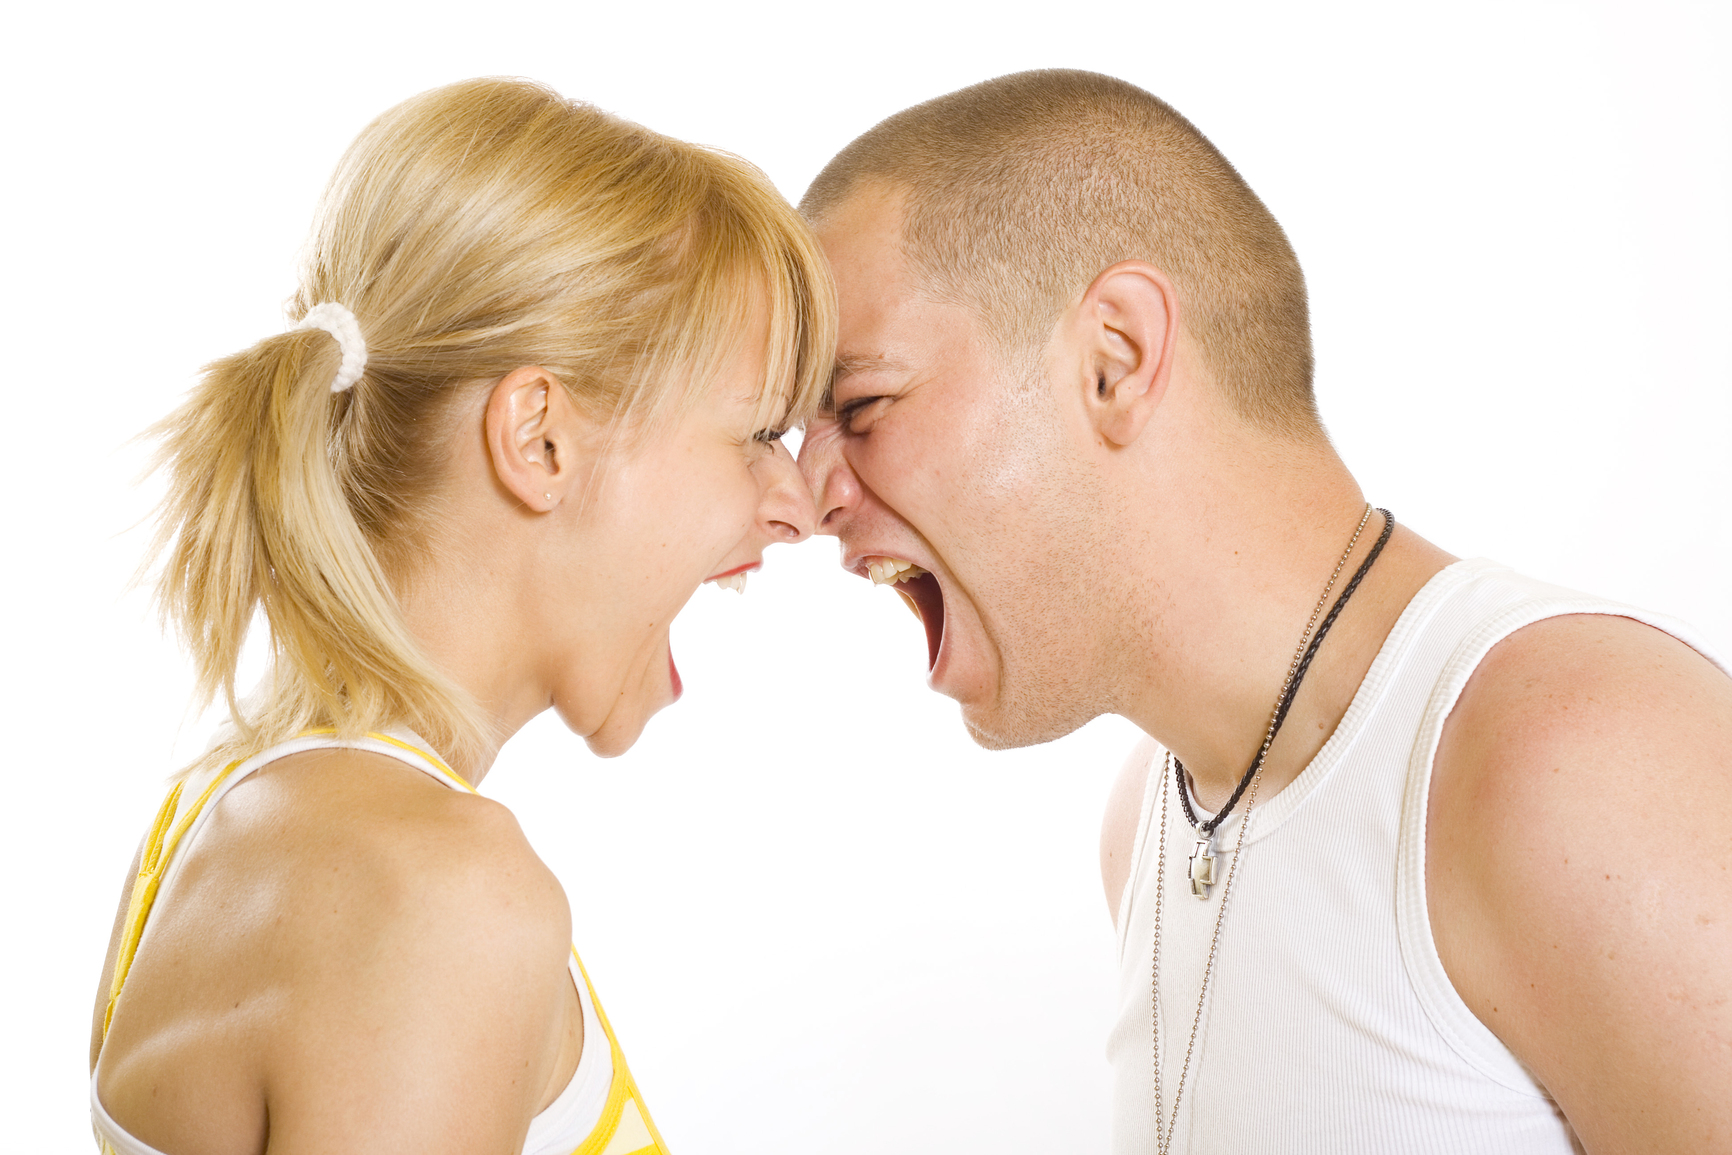 Is Anger Wrecking Your Relationships